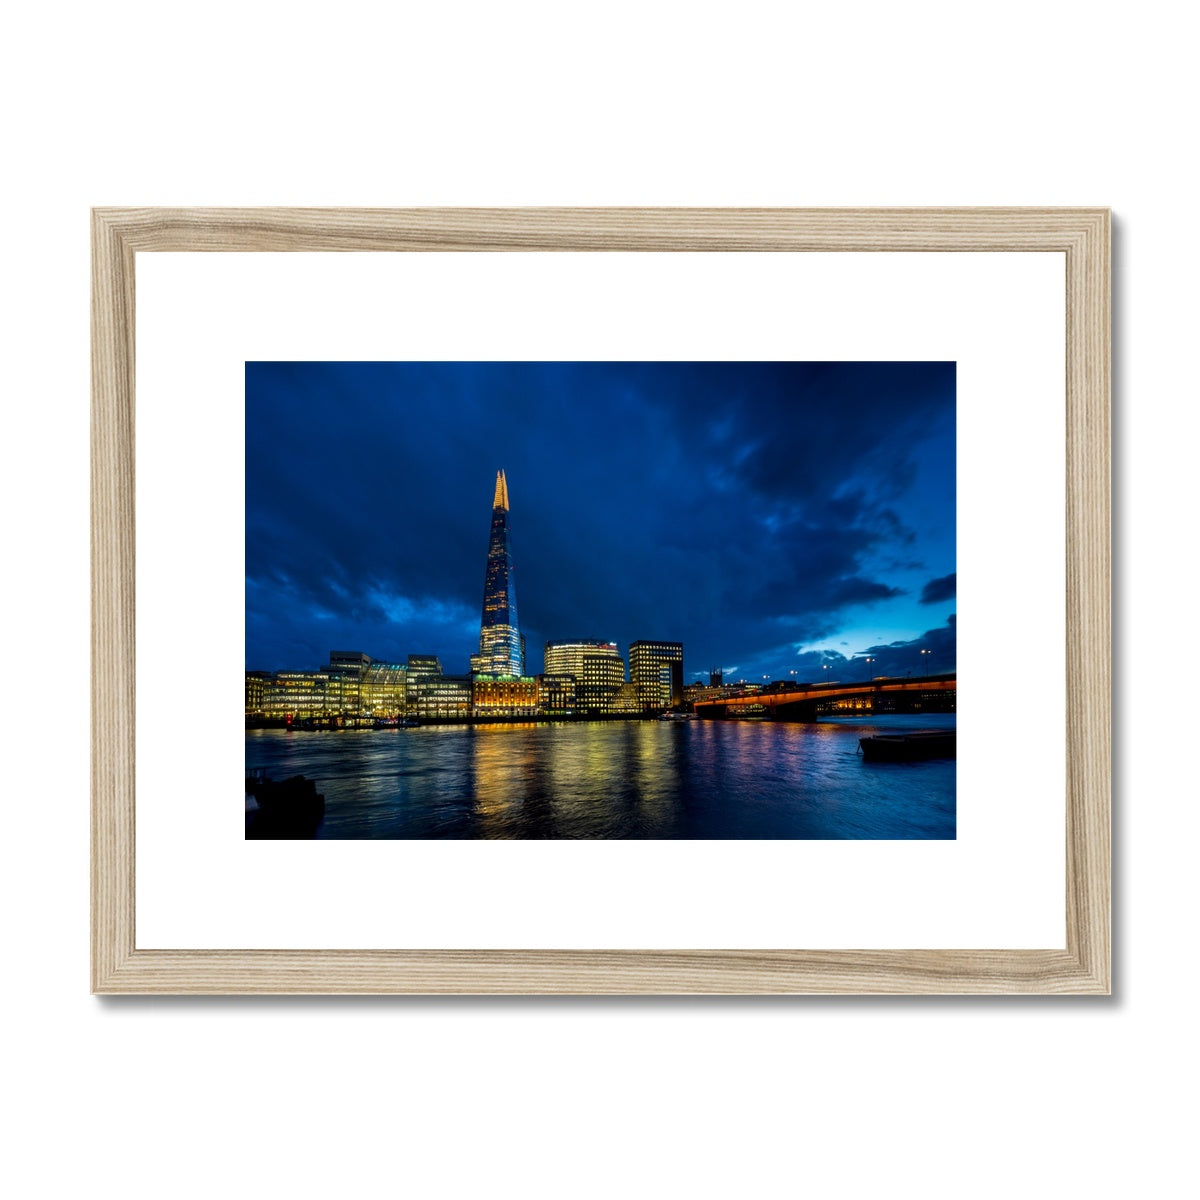 The Shard and river Thames at dusk, London. Framed & Mounted Print